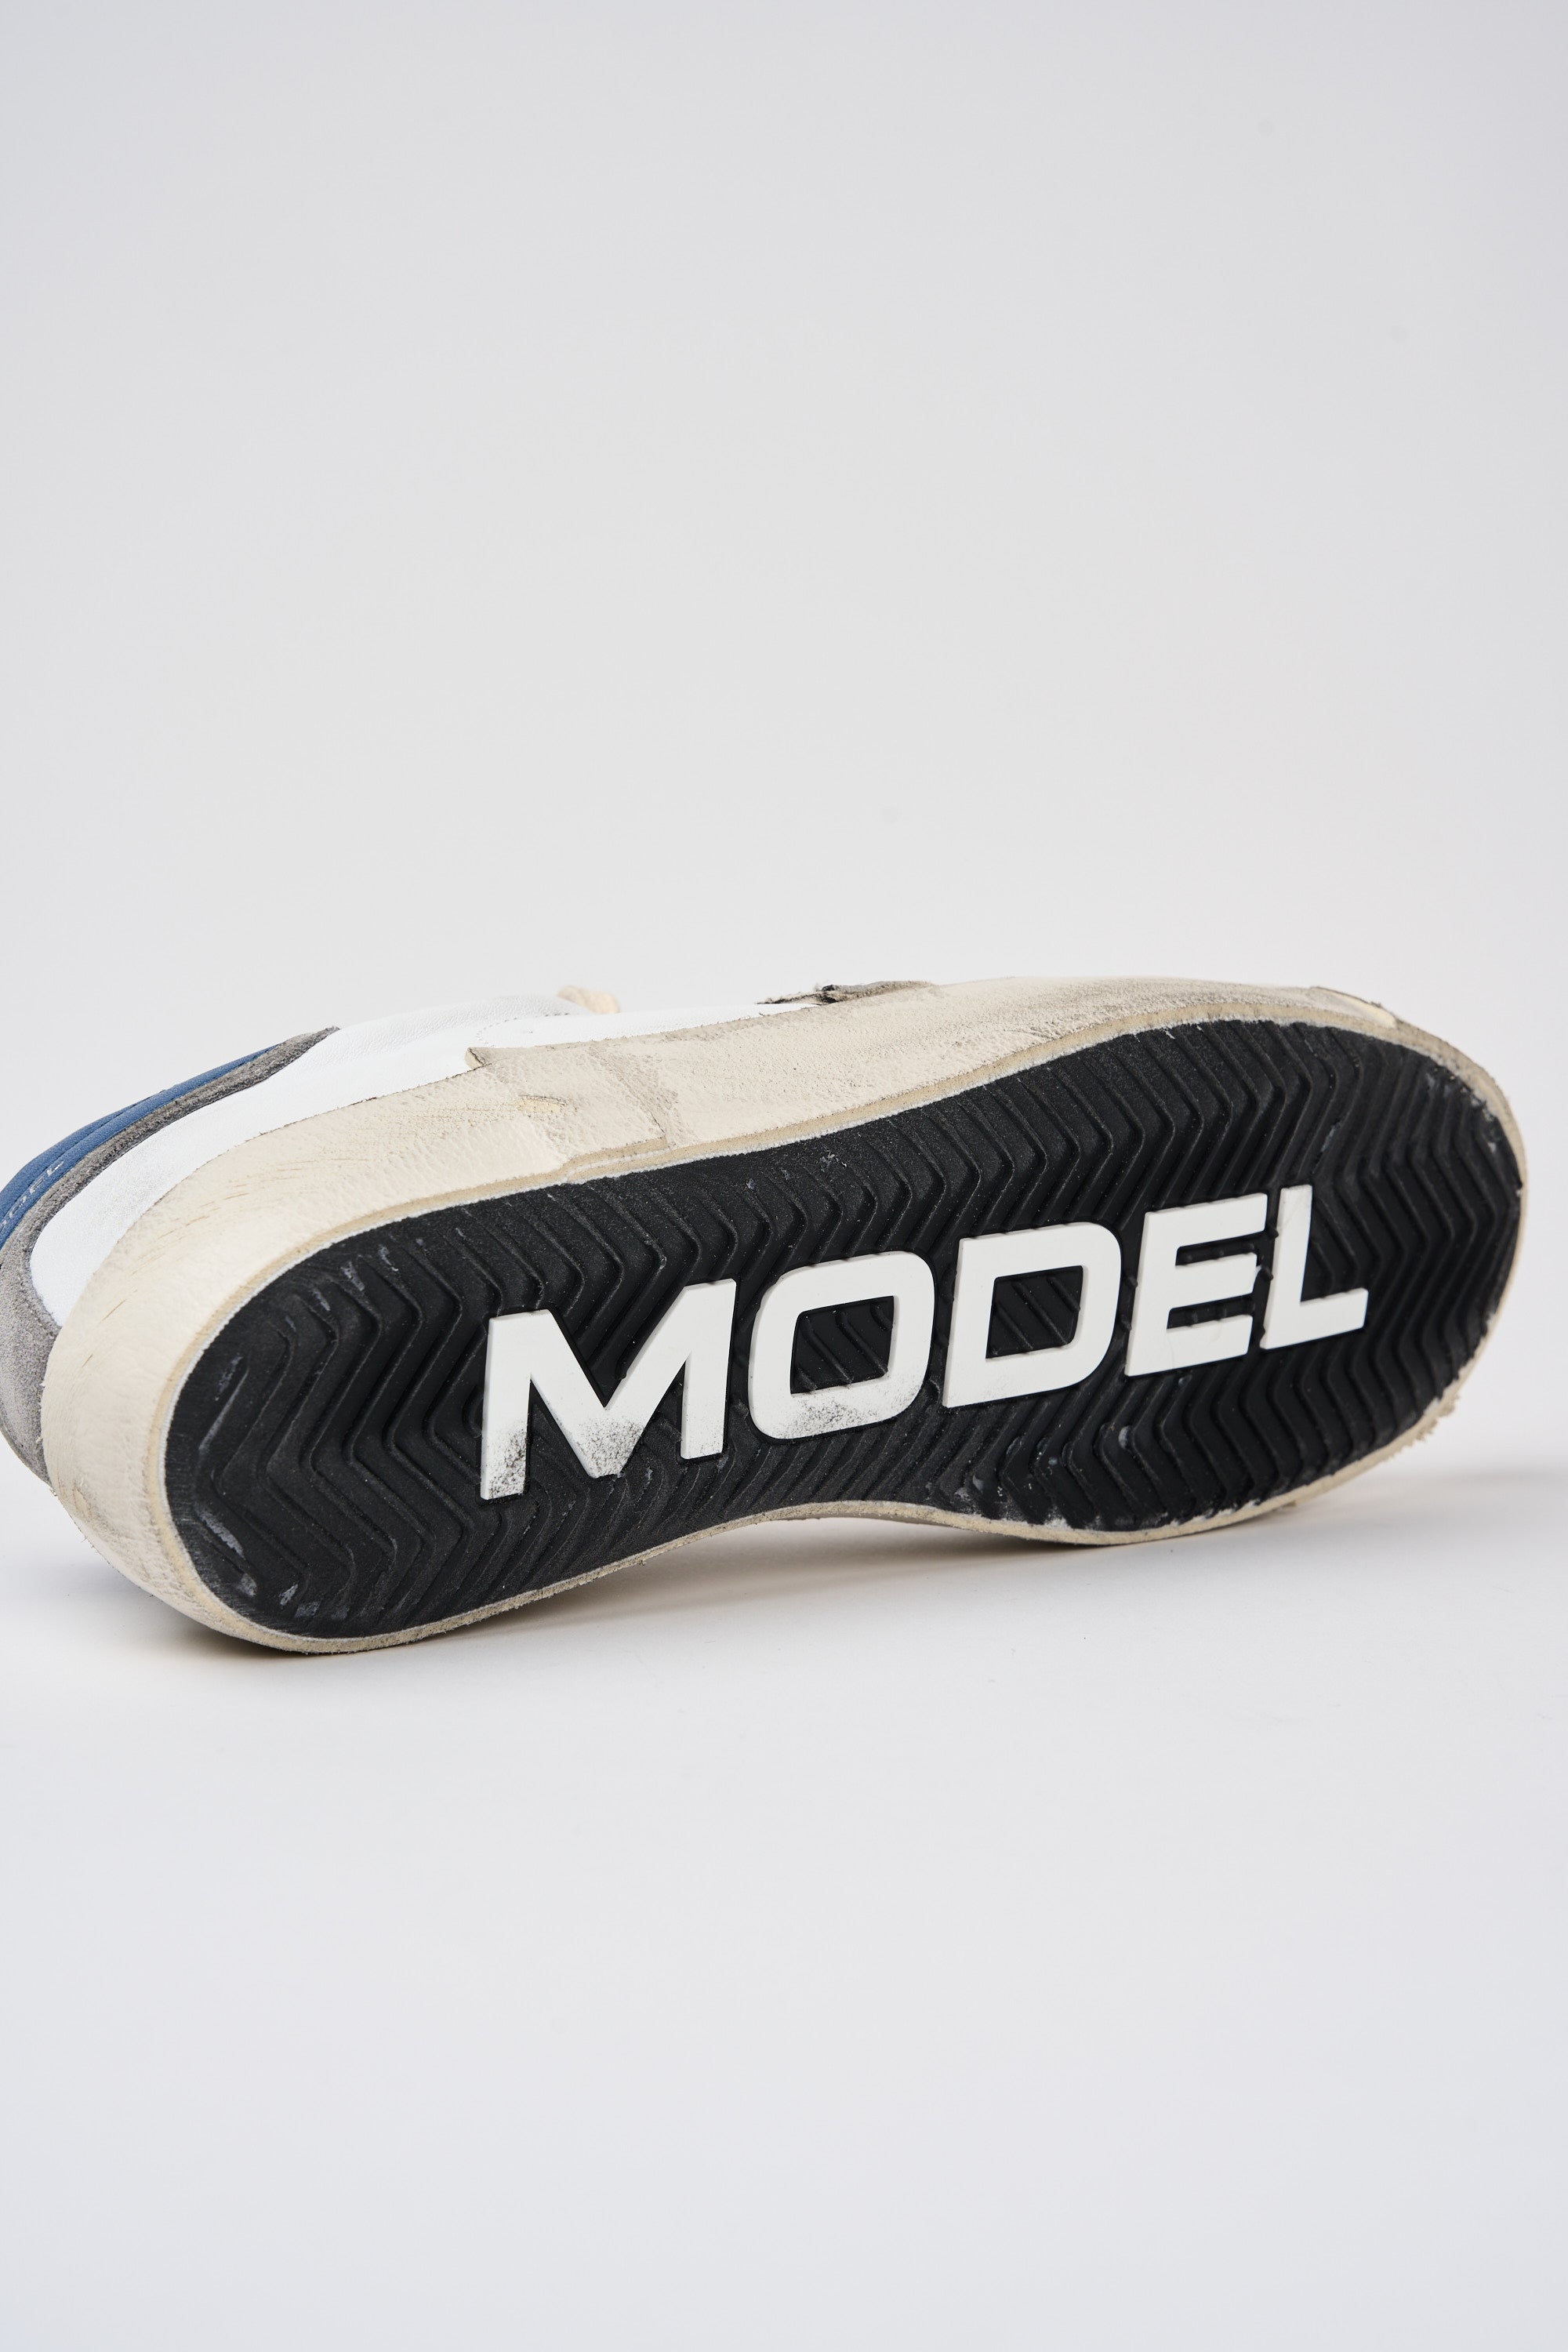 Philippe Model Sneaker Prsx Leather/Suede White/Blue-5